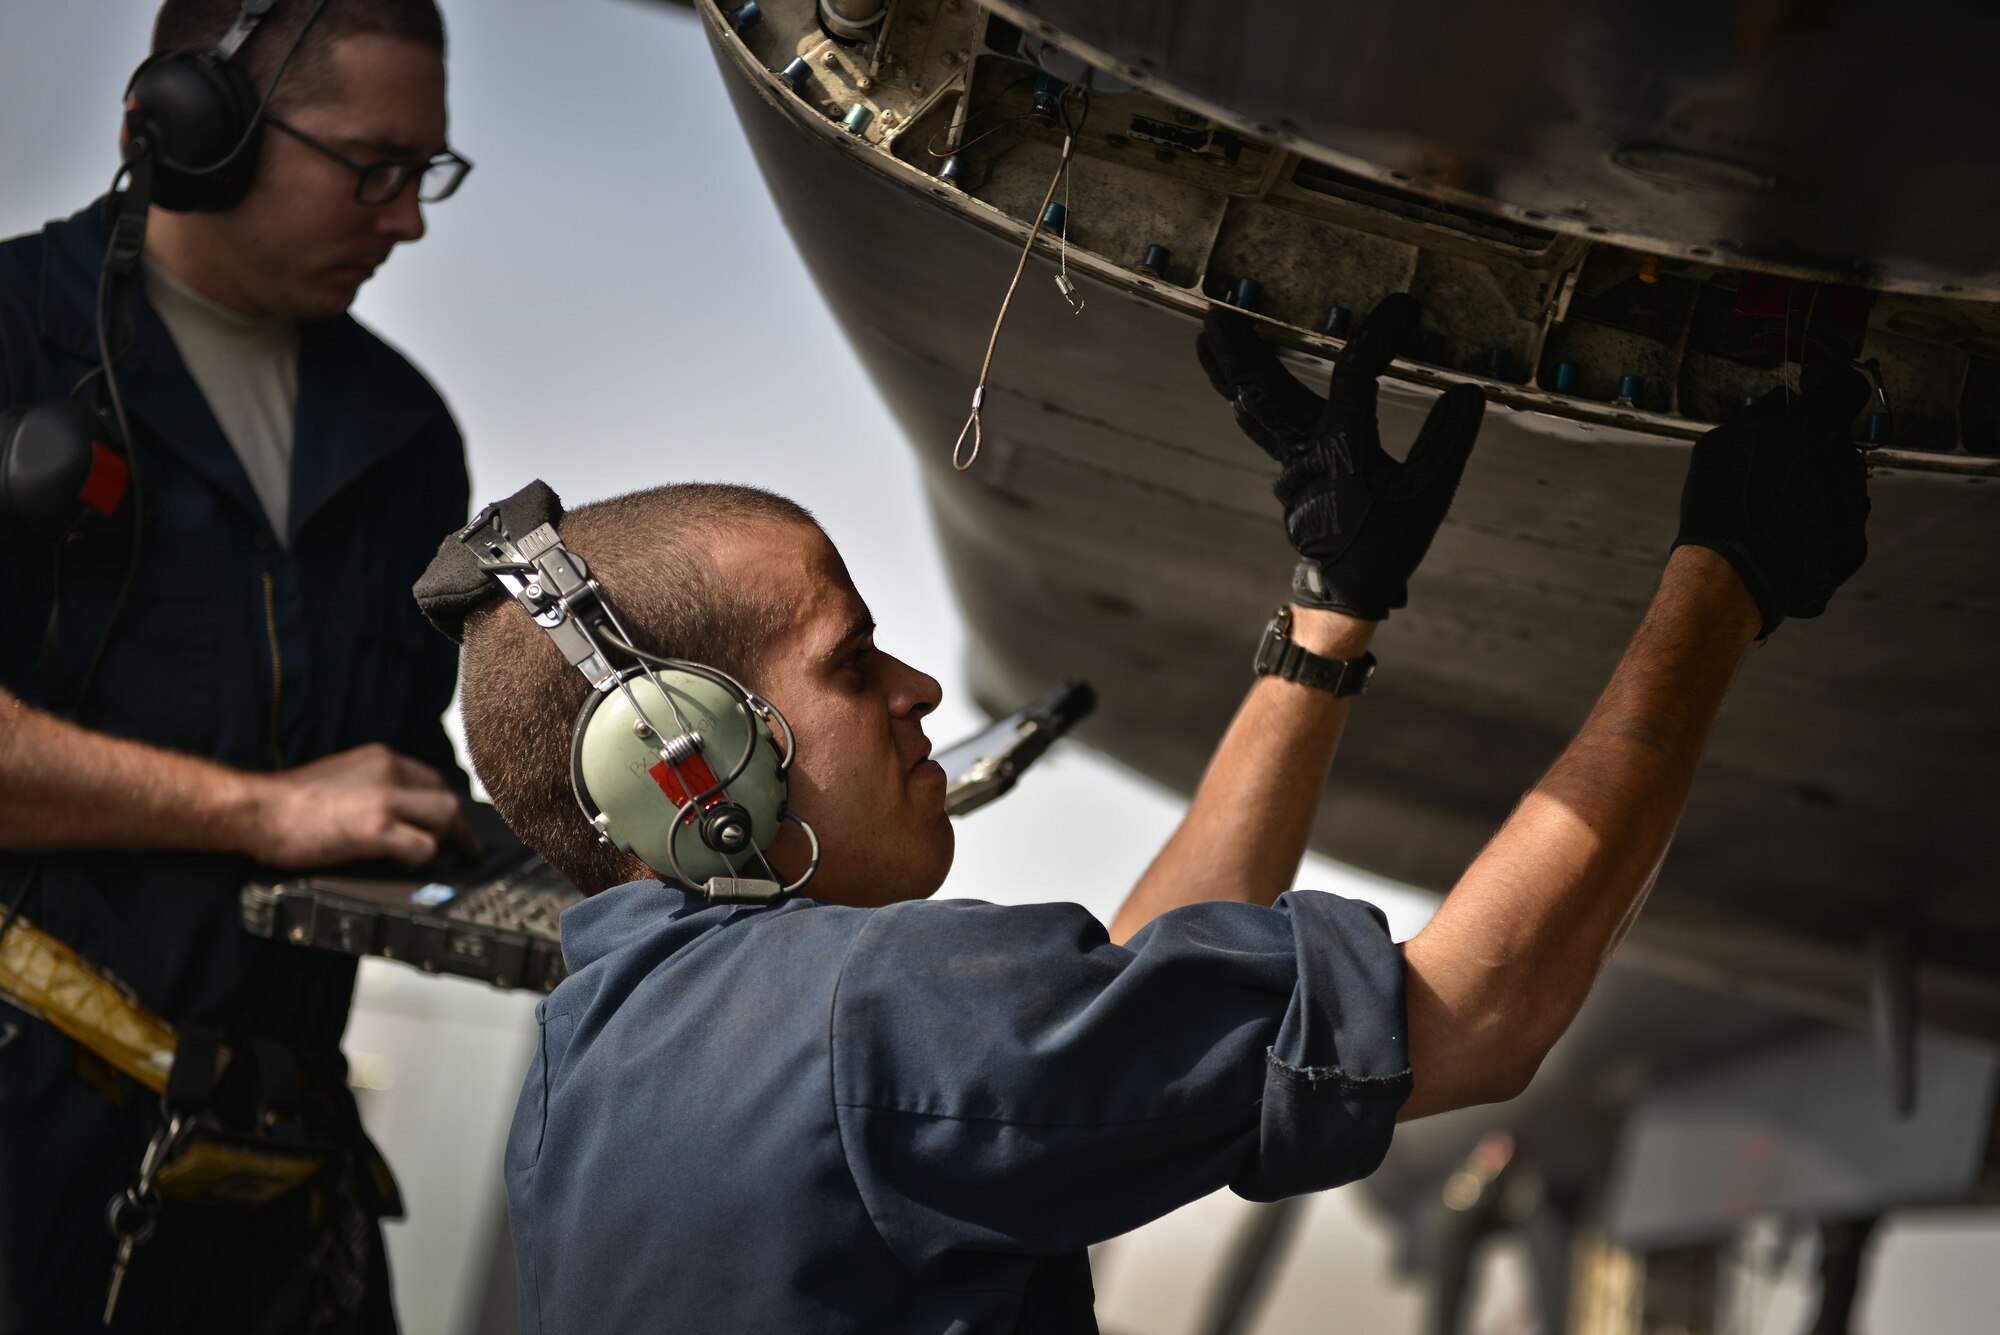 Airmen 1st Class Bobby and Brian, 28th Aircraft Maintenance Squadron crew chiefs, read through their technical orders during preventative maintenance on a B-1 bomber Sept. 22, 2015 at Al Udeid Air Base, Qatar. The two Airmen were deployed from Ellsworth Air Force Base, S.D. (U.S. Air Force photo by Staff Sgt. Alexandre Montes/Released)